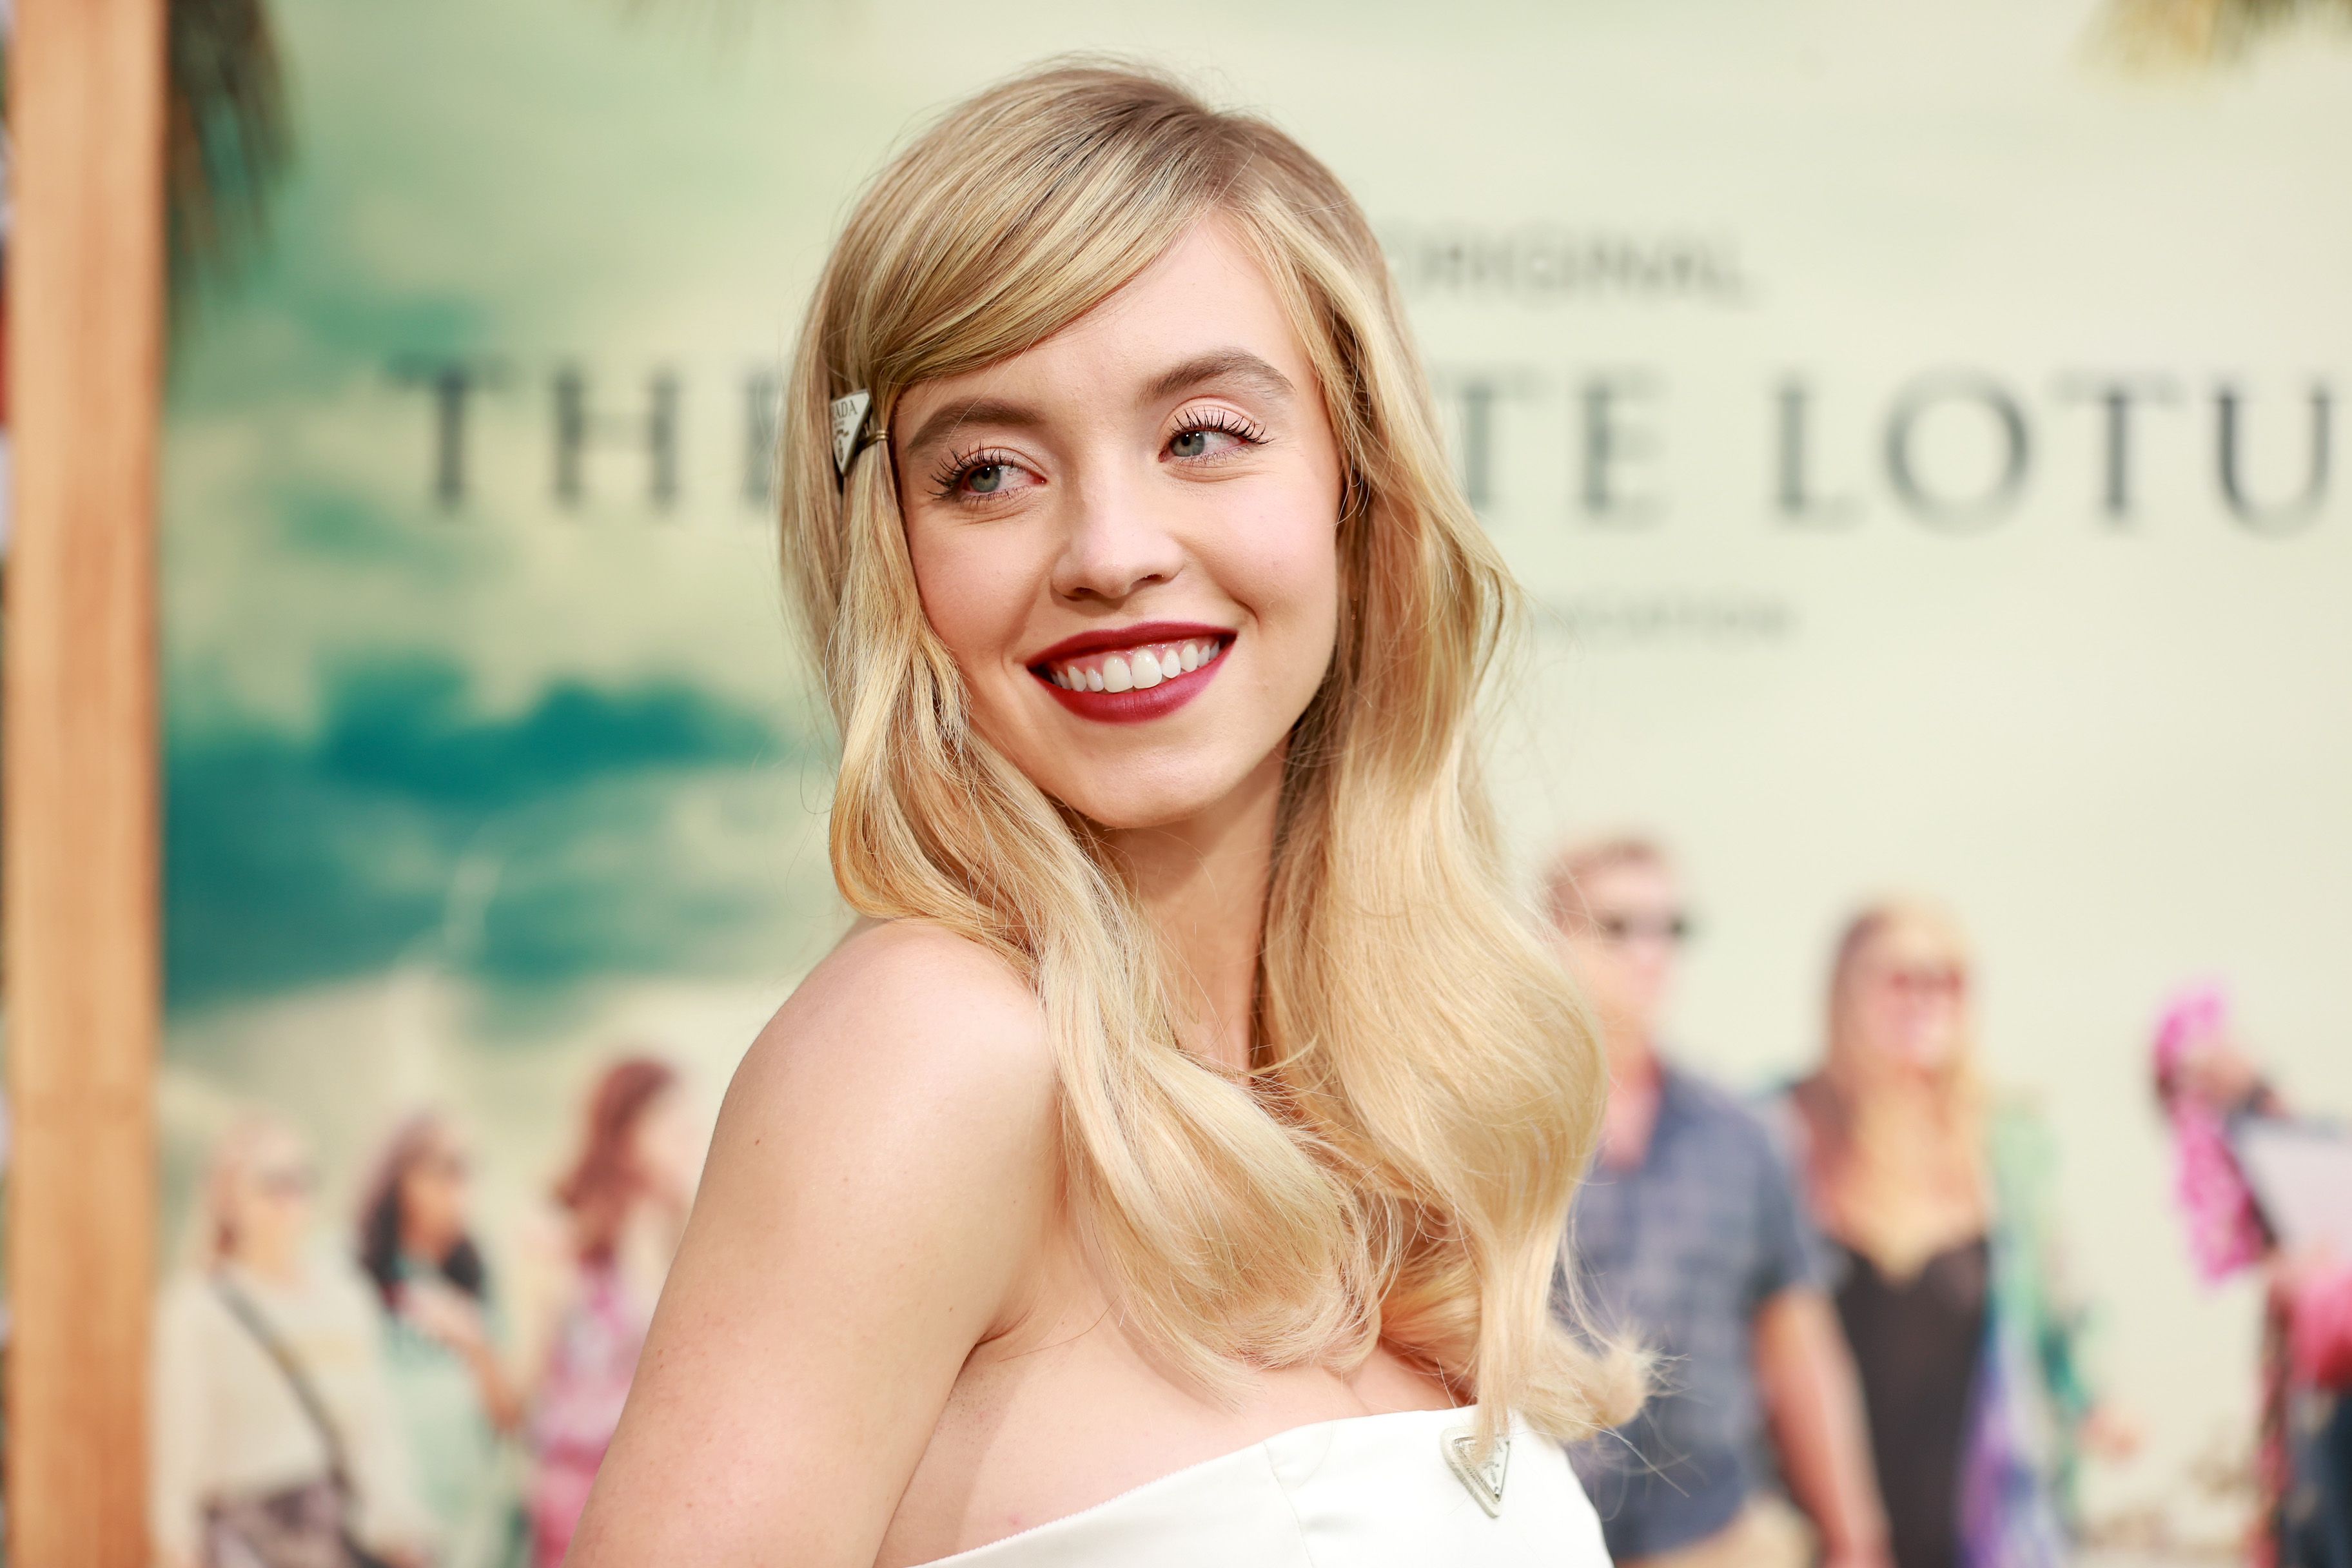 'The Voyeurs' cast member Sydney Sweeney arrives to 'The White Lotus' premiere in Los Angeles in a white dress